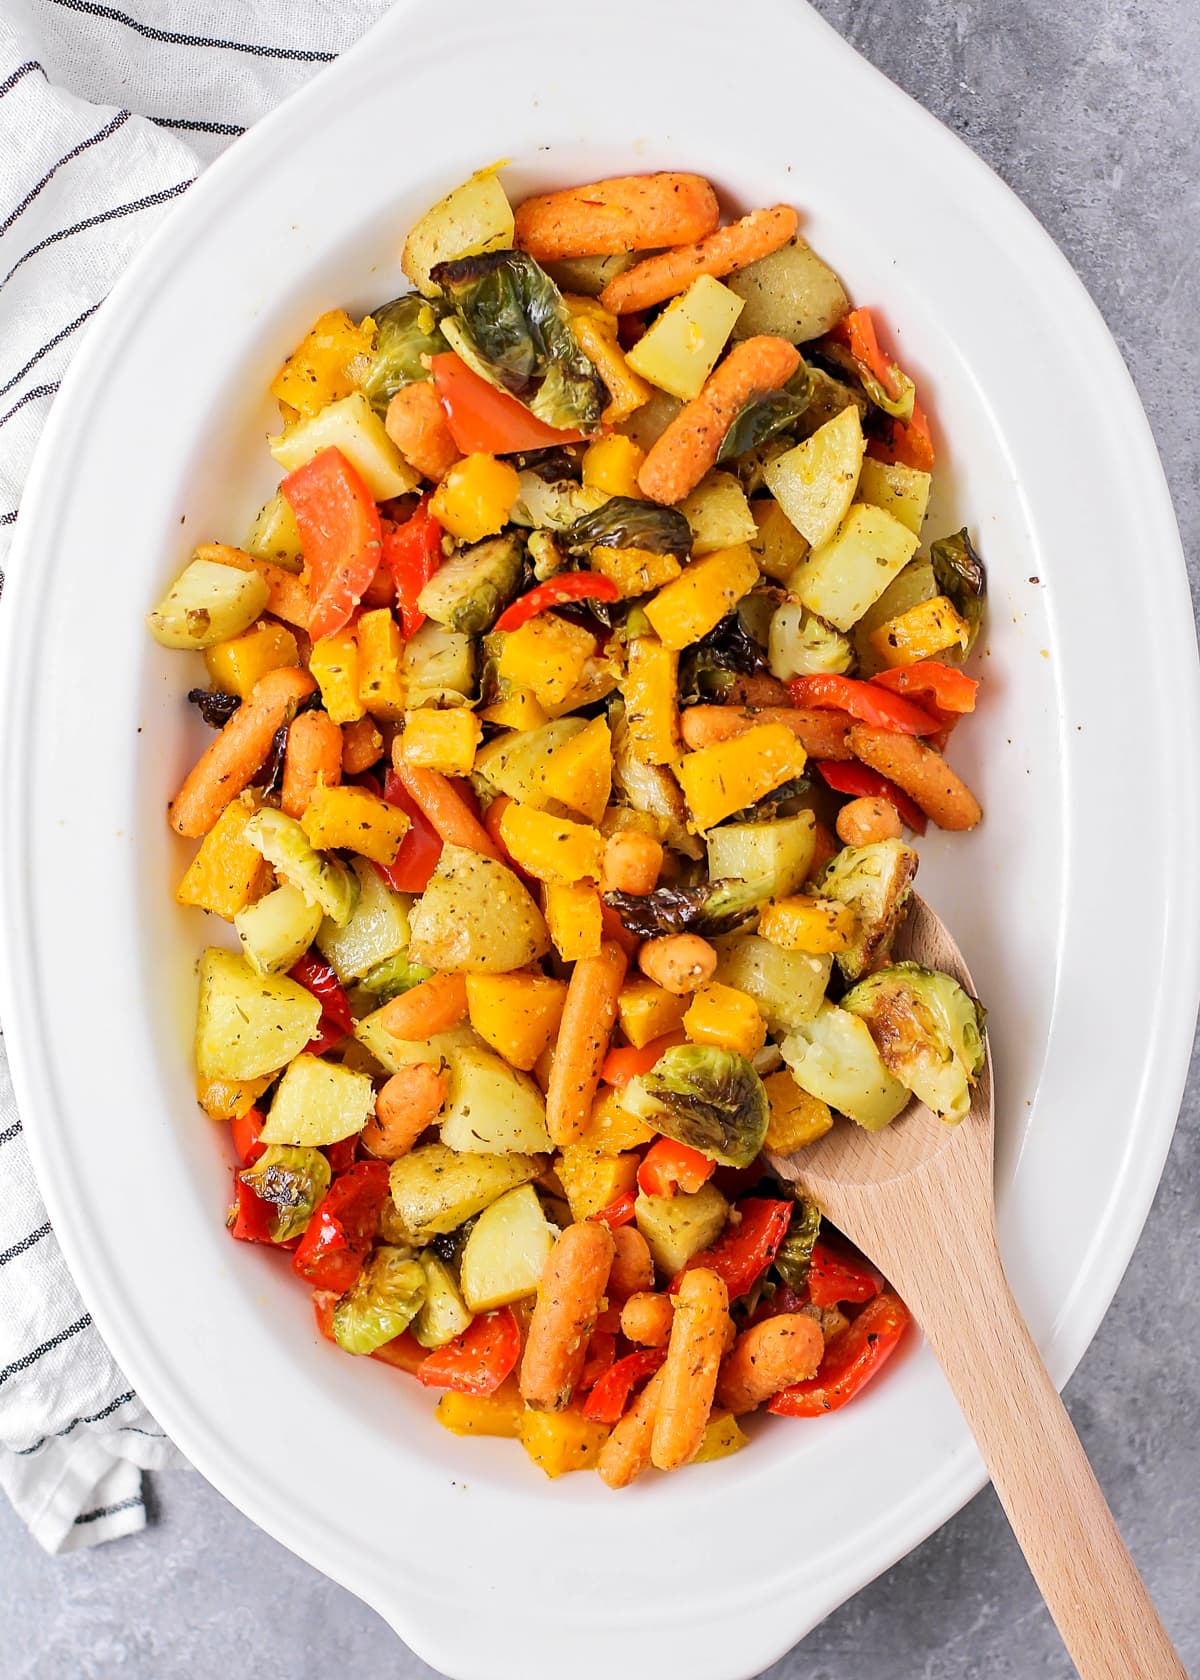 Roasted vegetables in a bowl all mixed together.